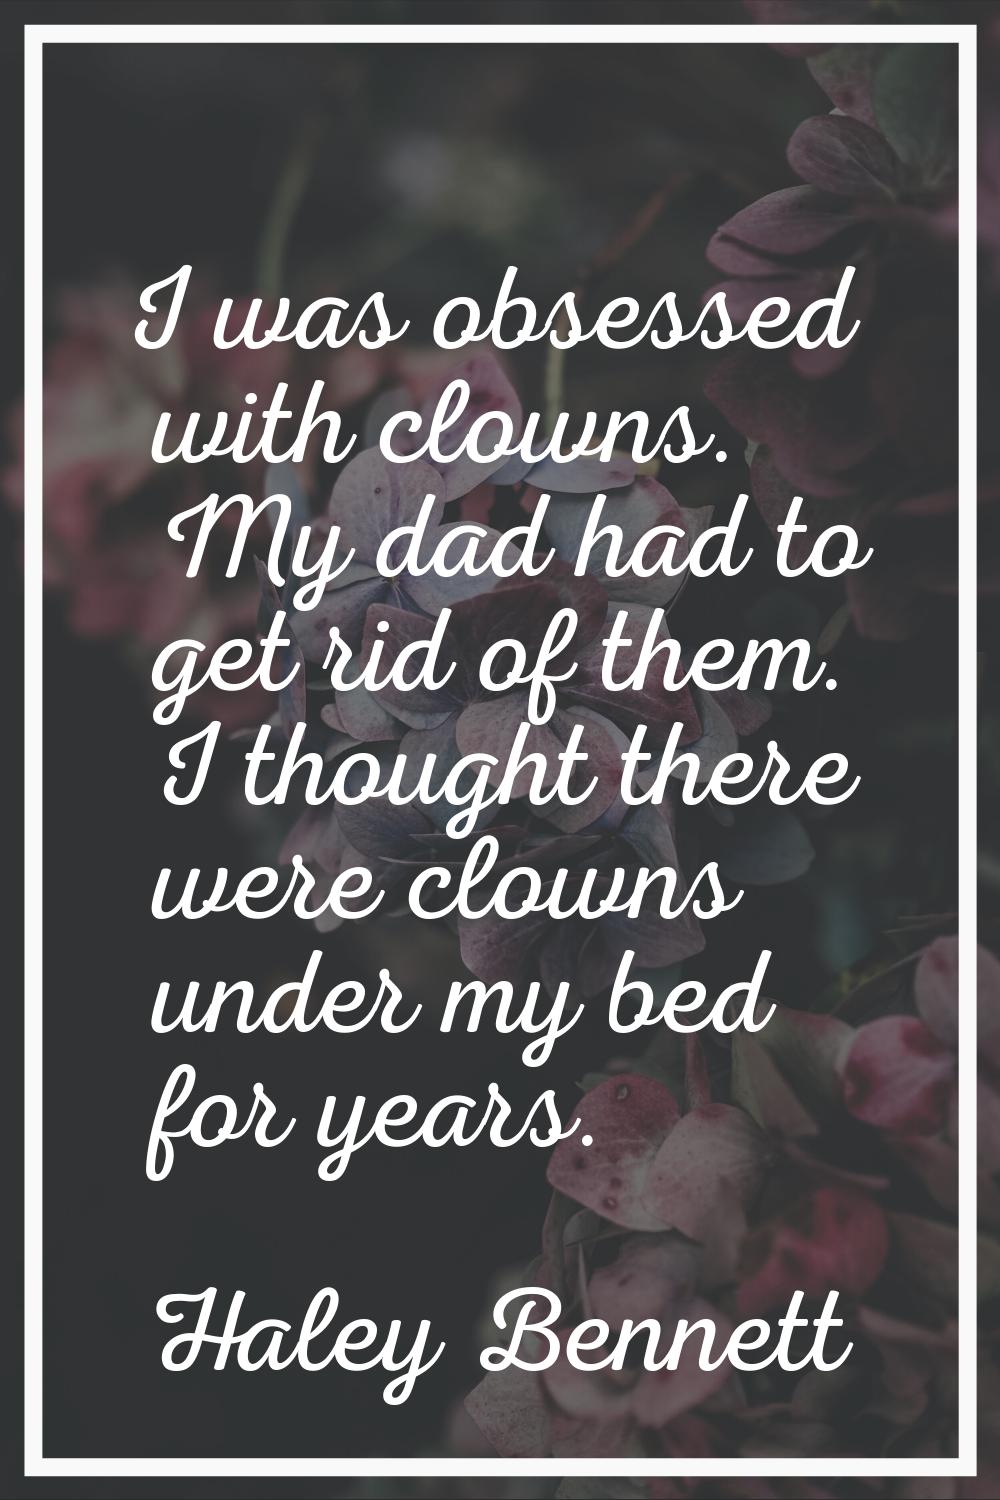 I was obsessed with clowns. My dad had to get rid of them. I thought there were clowns under my bed